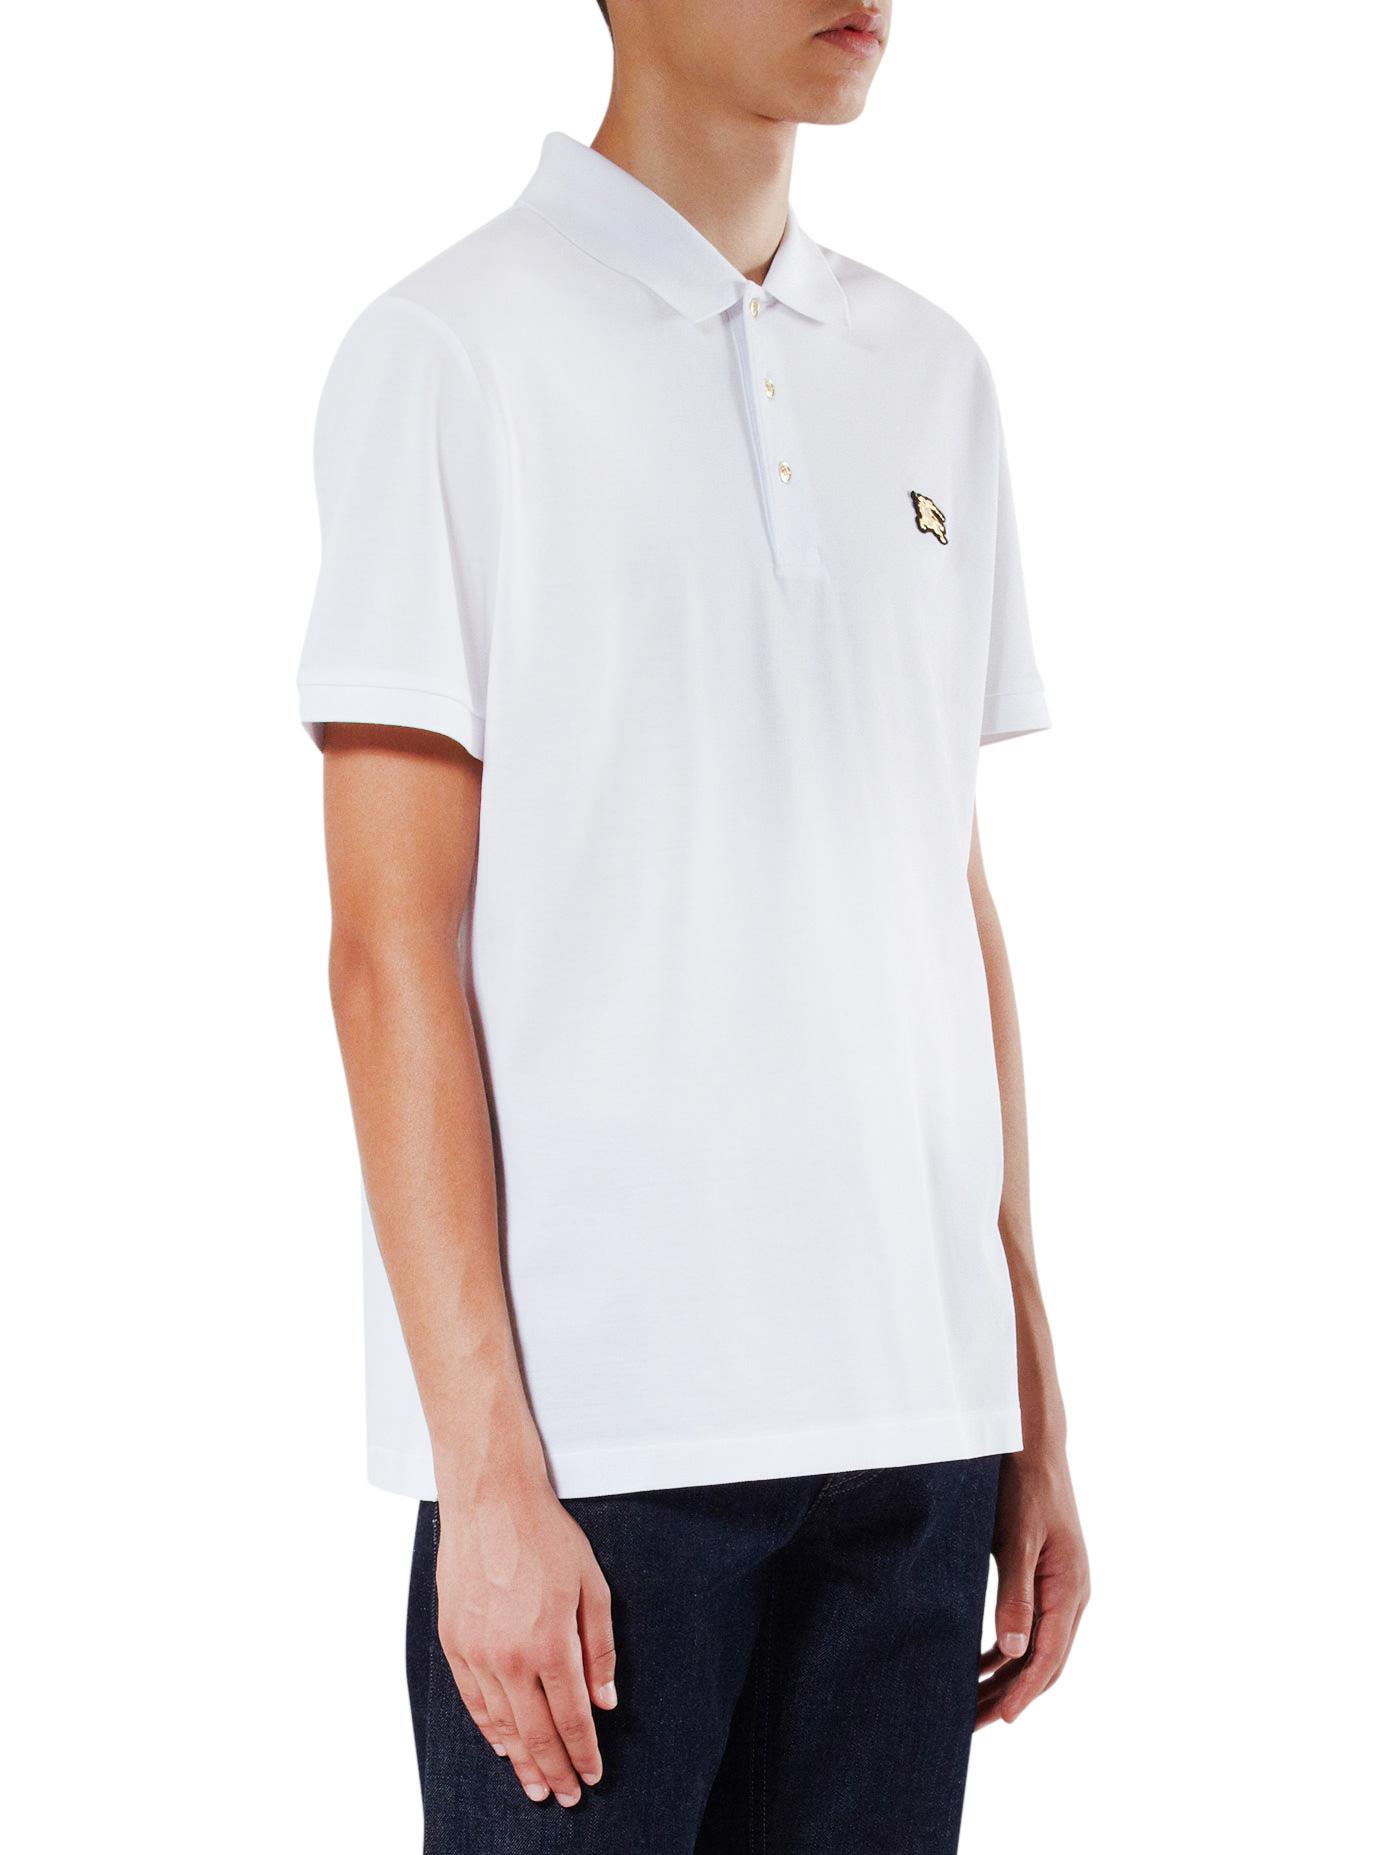 Burberry Cotton Polo With Gold Horse in White for Men - Lyst